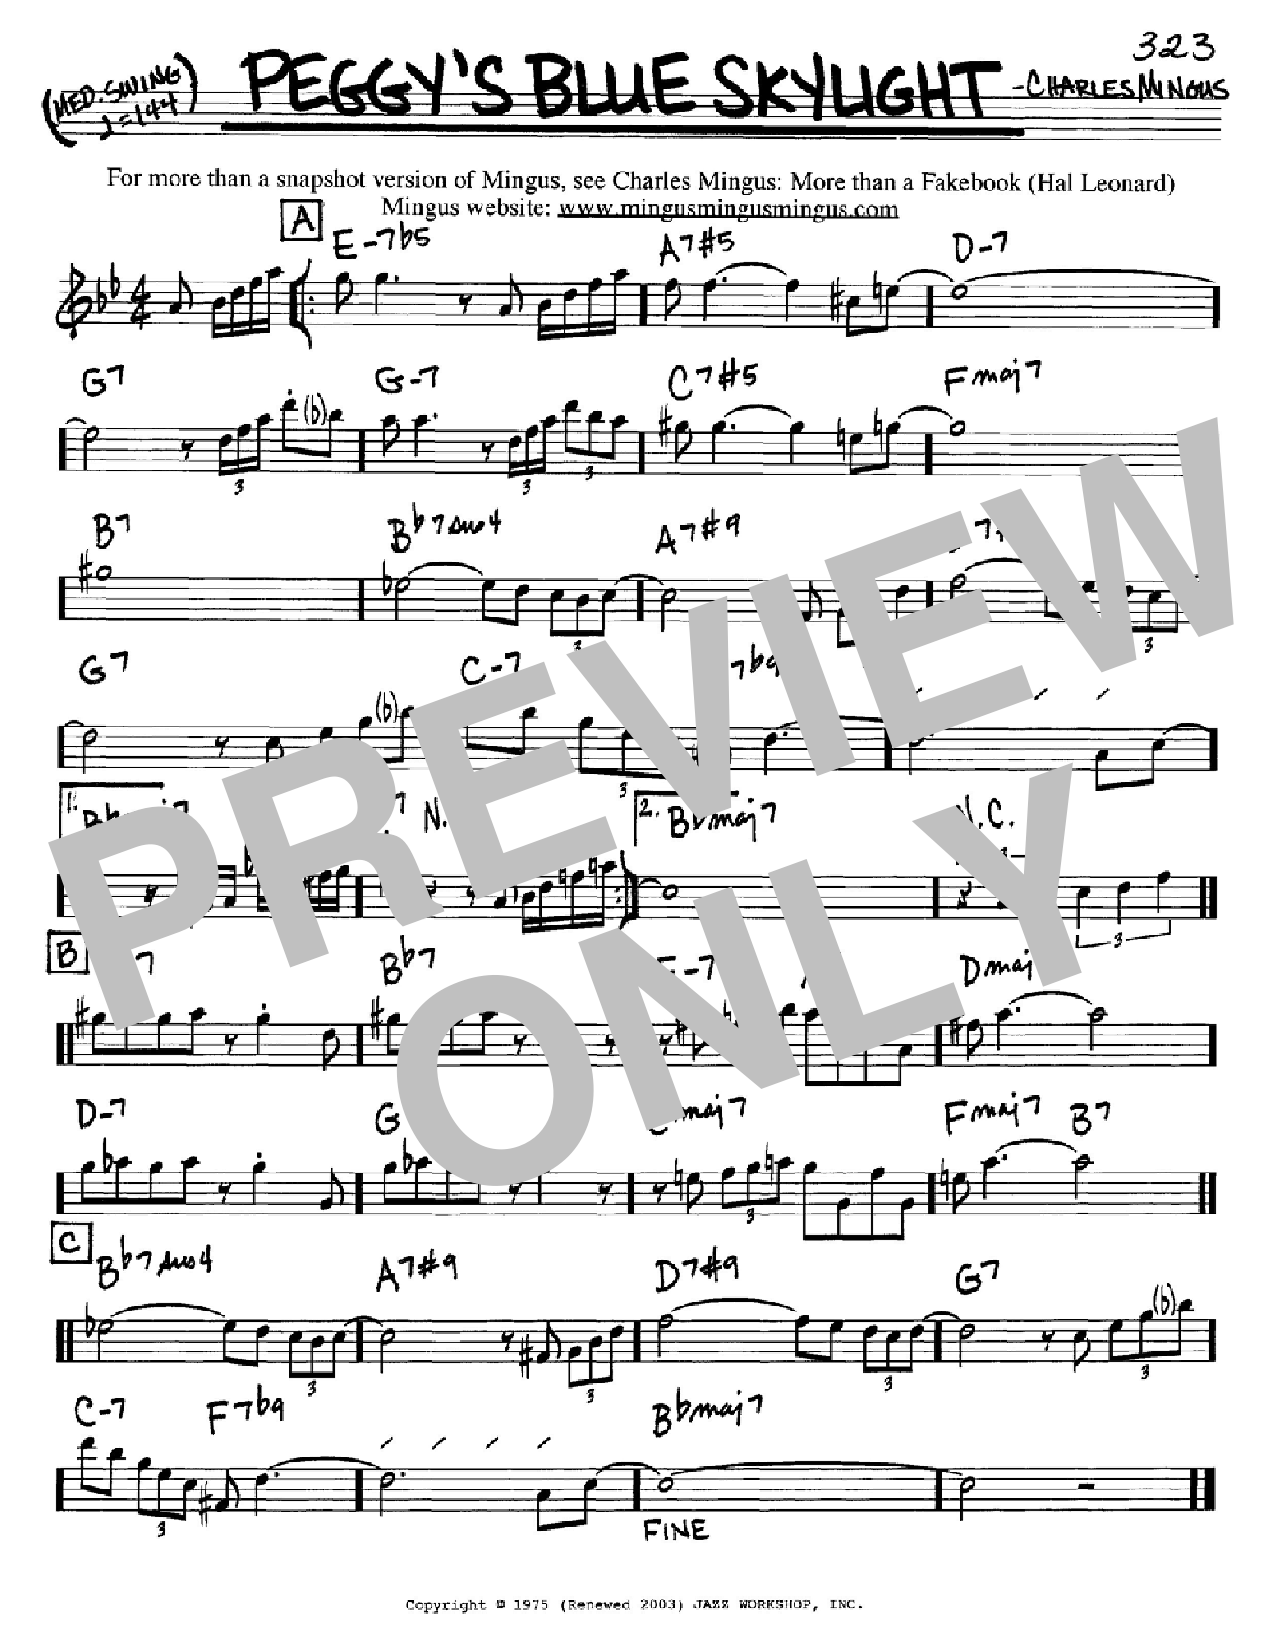 Download Charles Mingus Peggy's Blue Skylight Sheet Music